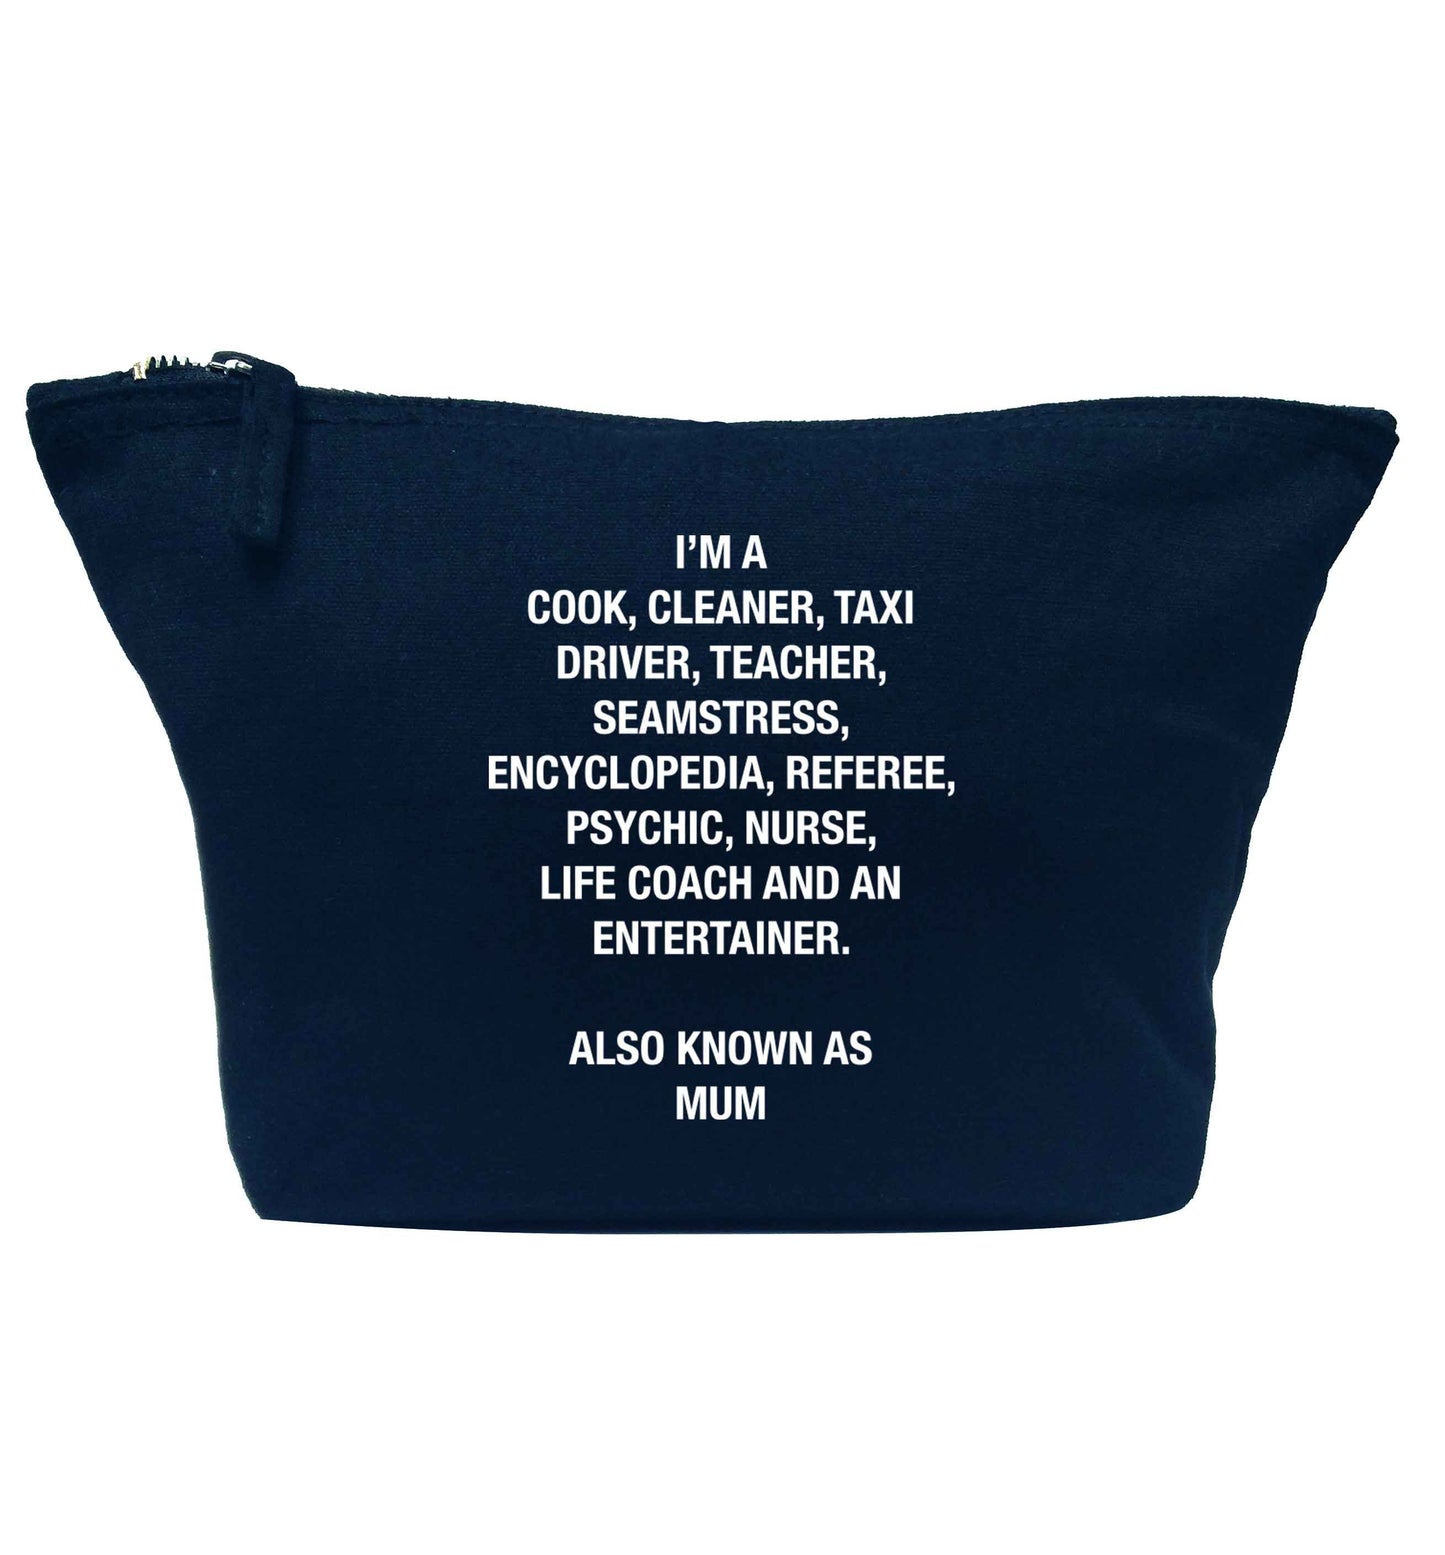 Funny gifts for your mum on mother's dayor her birthday! Mum, cook, cleaner, taxi driver, teacher, seamstress, encyclopedia, referee, psychic, nurse, life coach and entertainer navy makeup bag